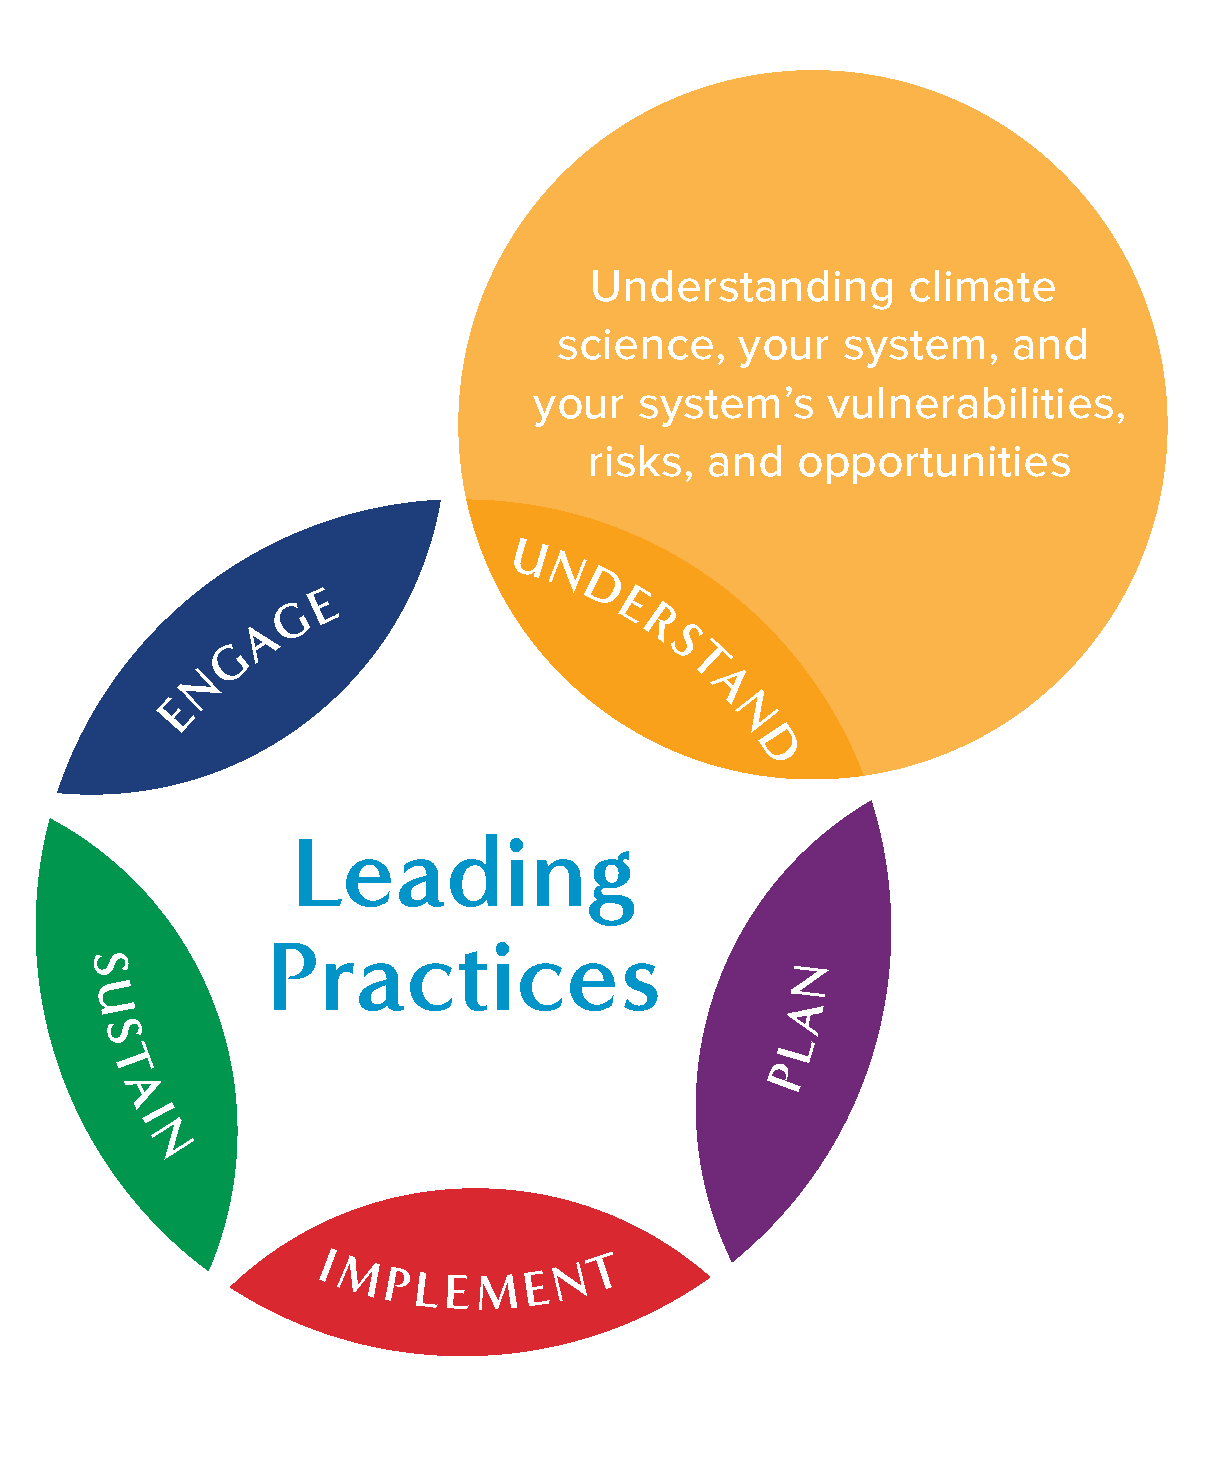 Graphic showing "understand" call-out, noting that this section includes "understanding climate science, your system, and your system's vulnerabilities, risks and opportunities"